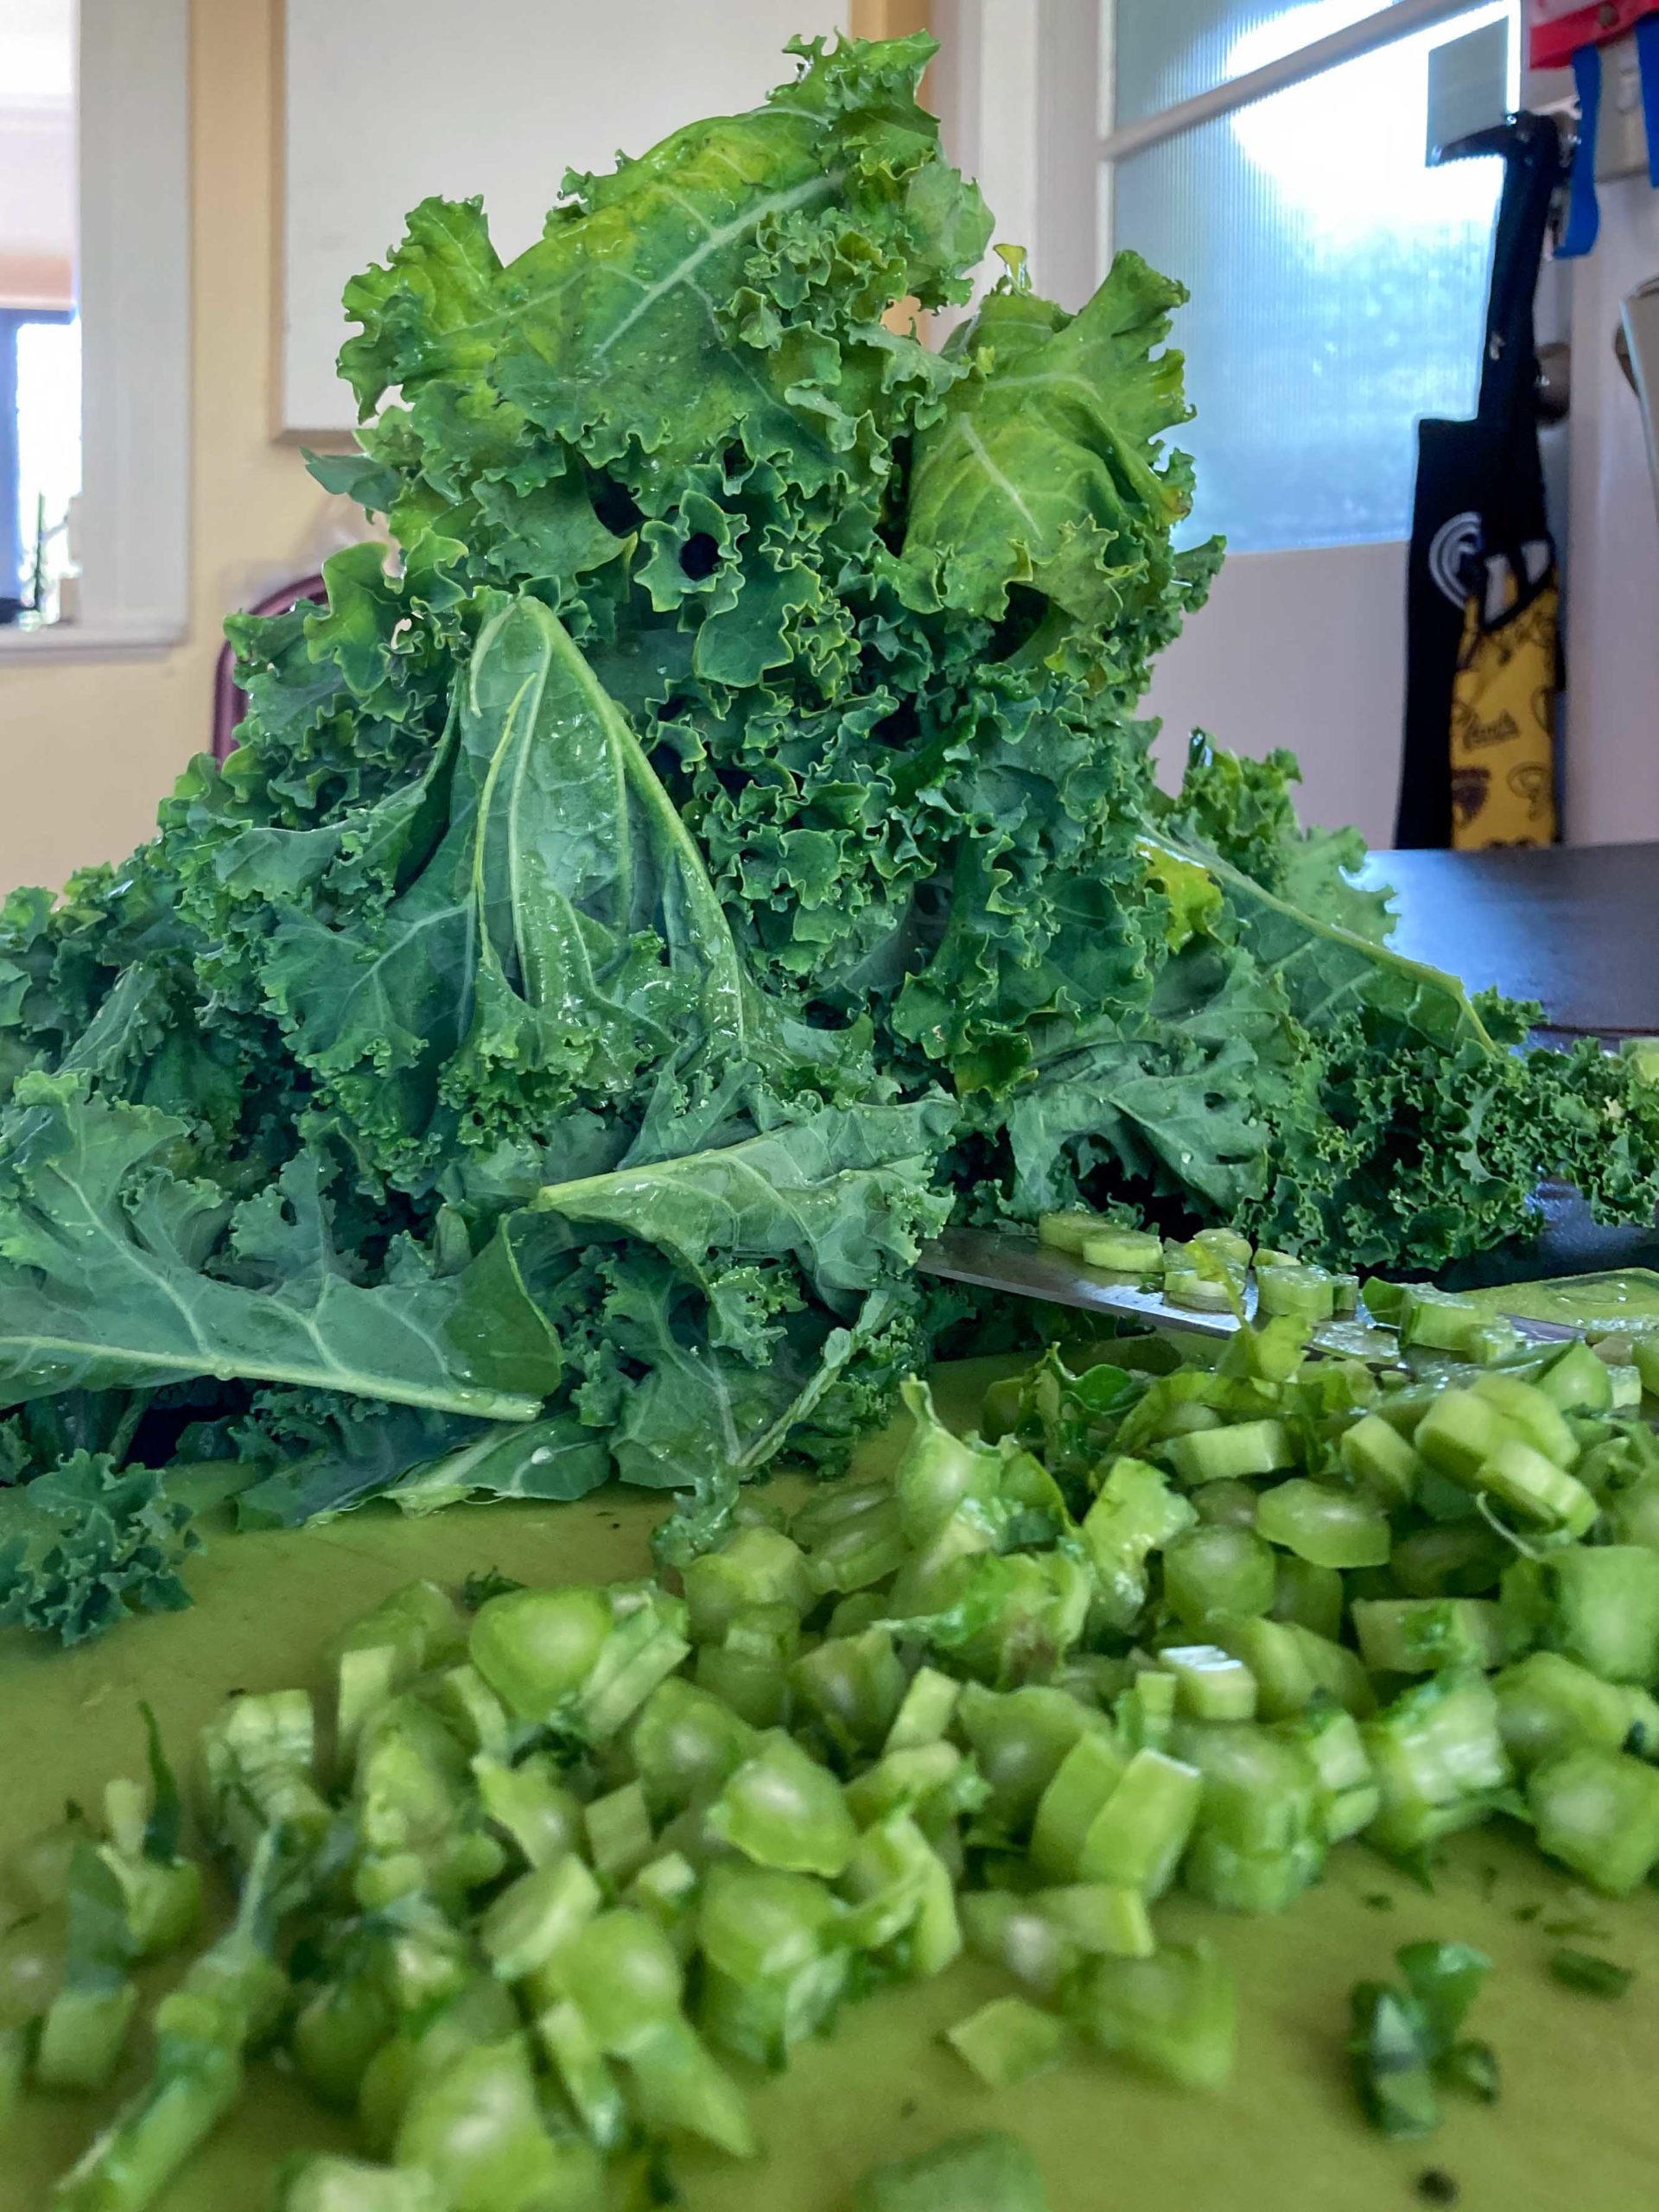 A pile of washed kale leaves, with chopped kale stalks in front of it